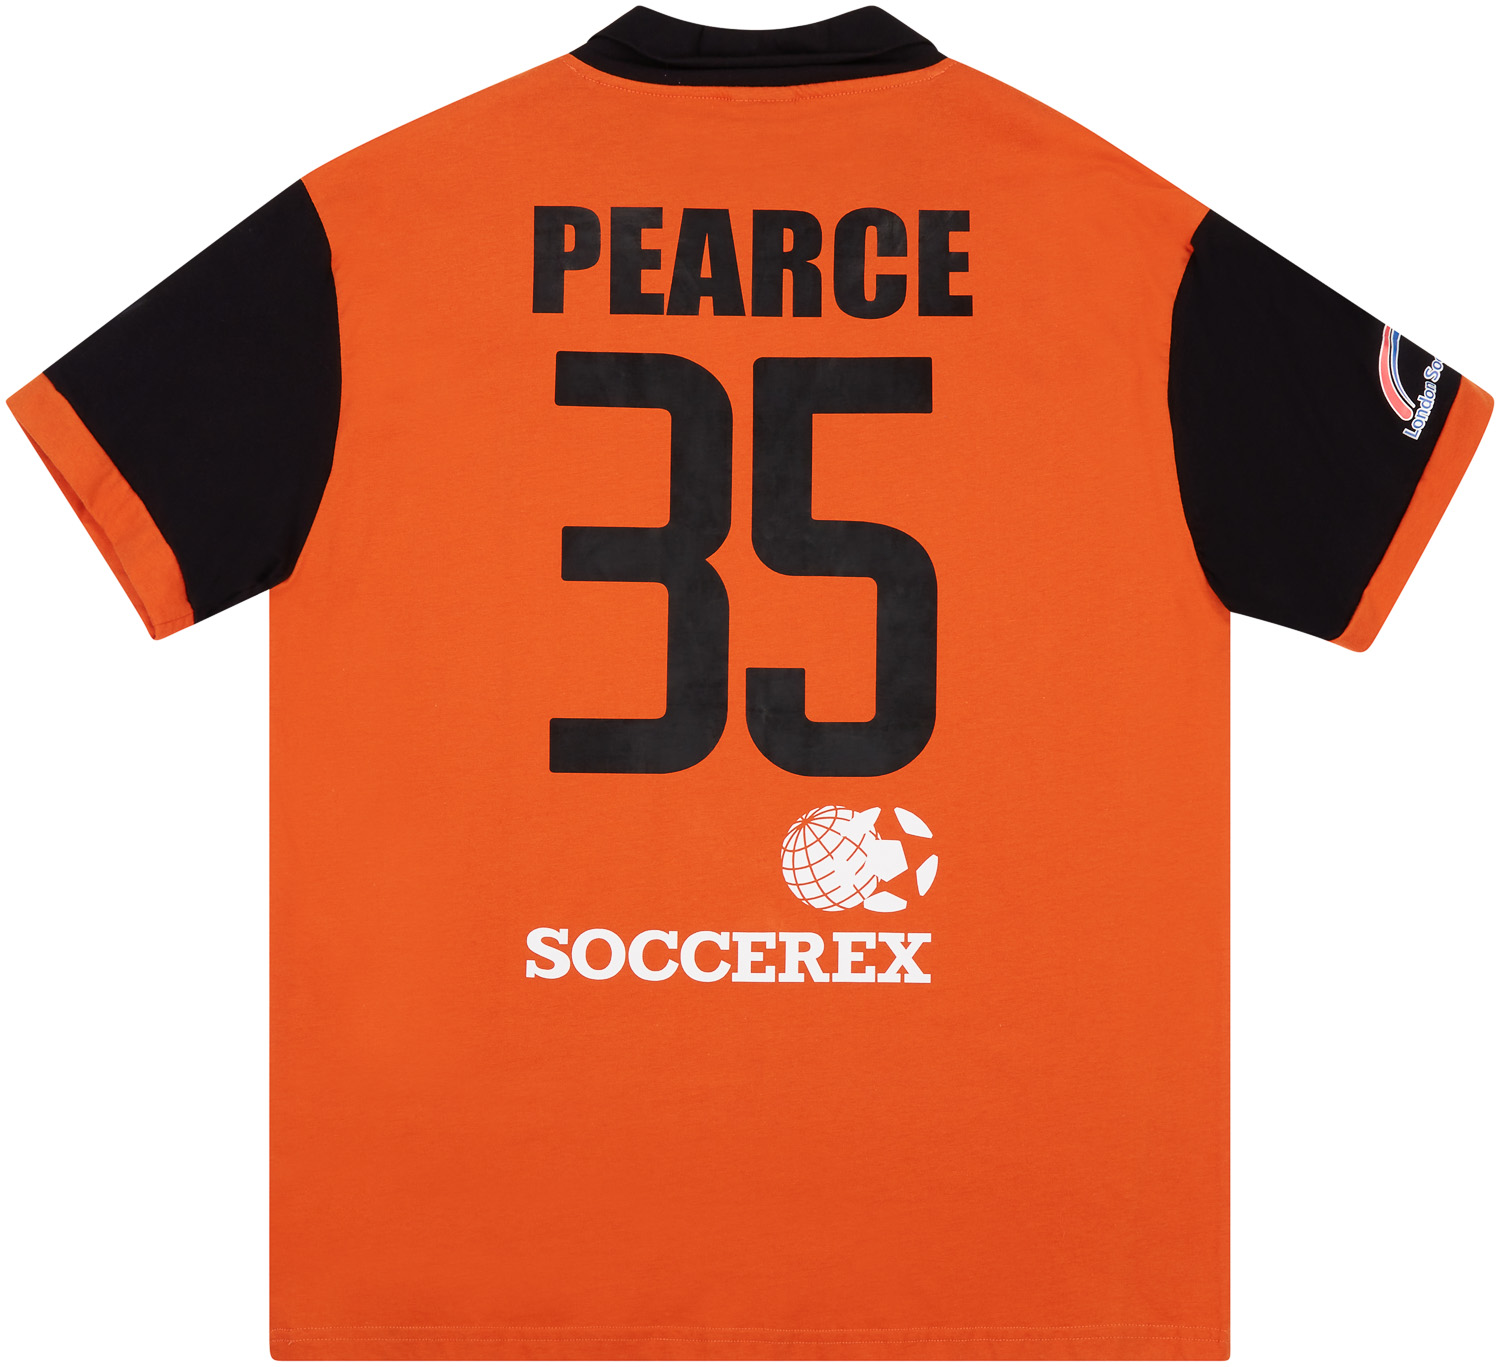 2011 Fulham London Legends Cup Masters Shirt Pearce #35